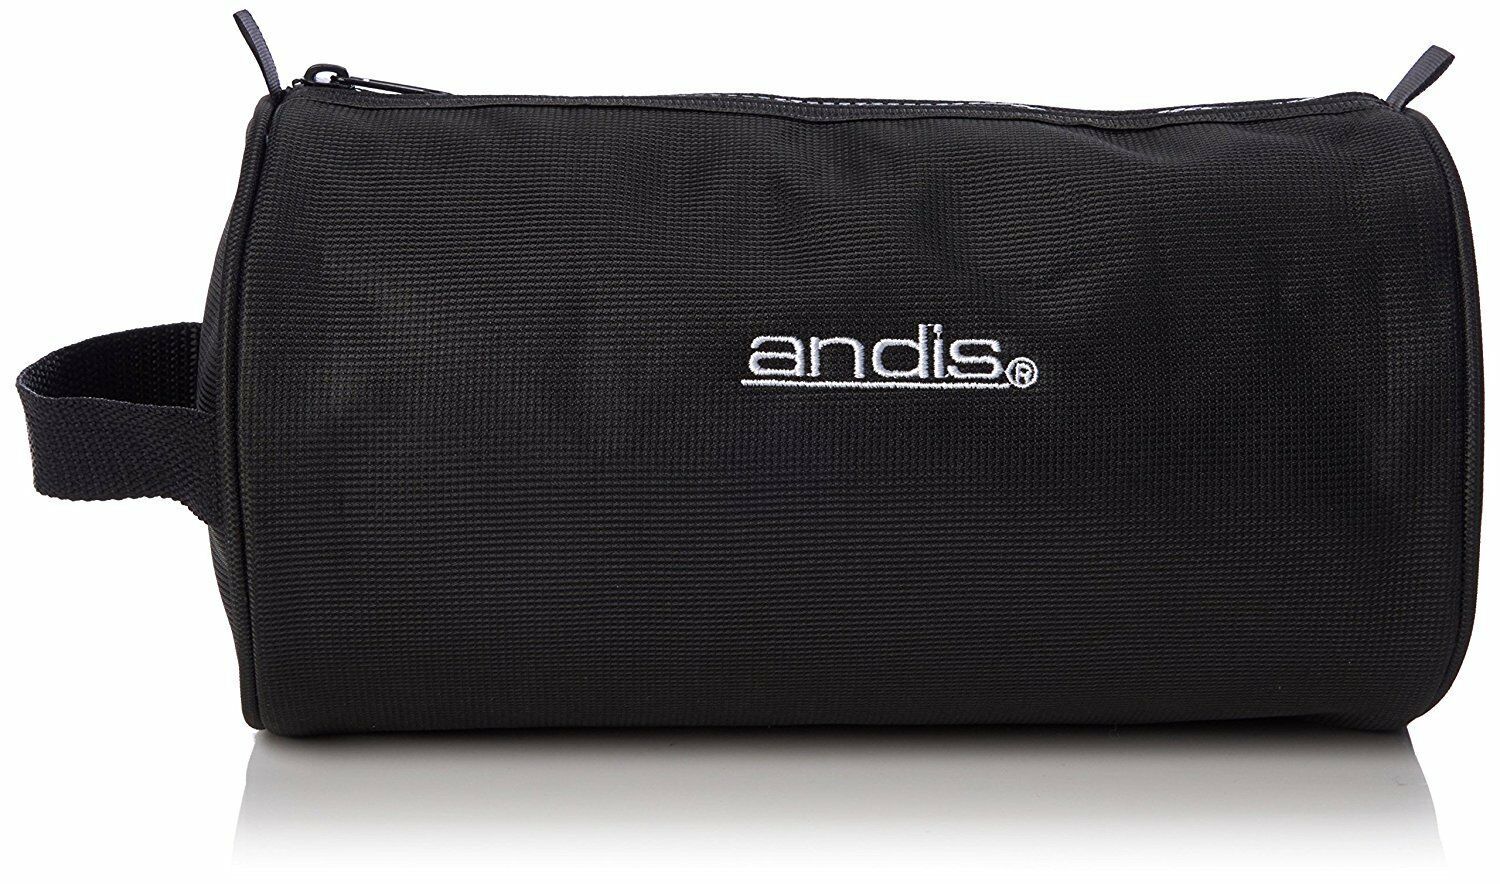 ANDIS ACCESSORY Clipper Blade Tool Storage CASE Tote Utility BAG GROOMER BARBER - $20.99